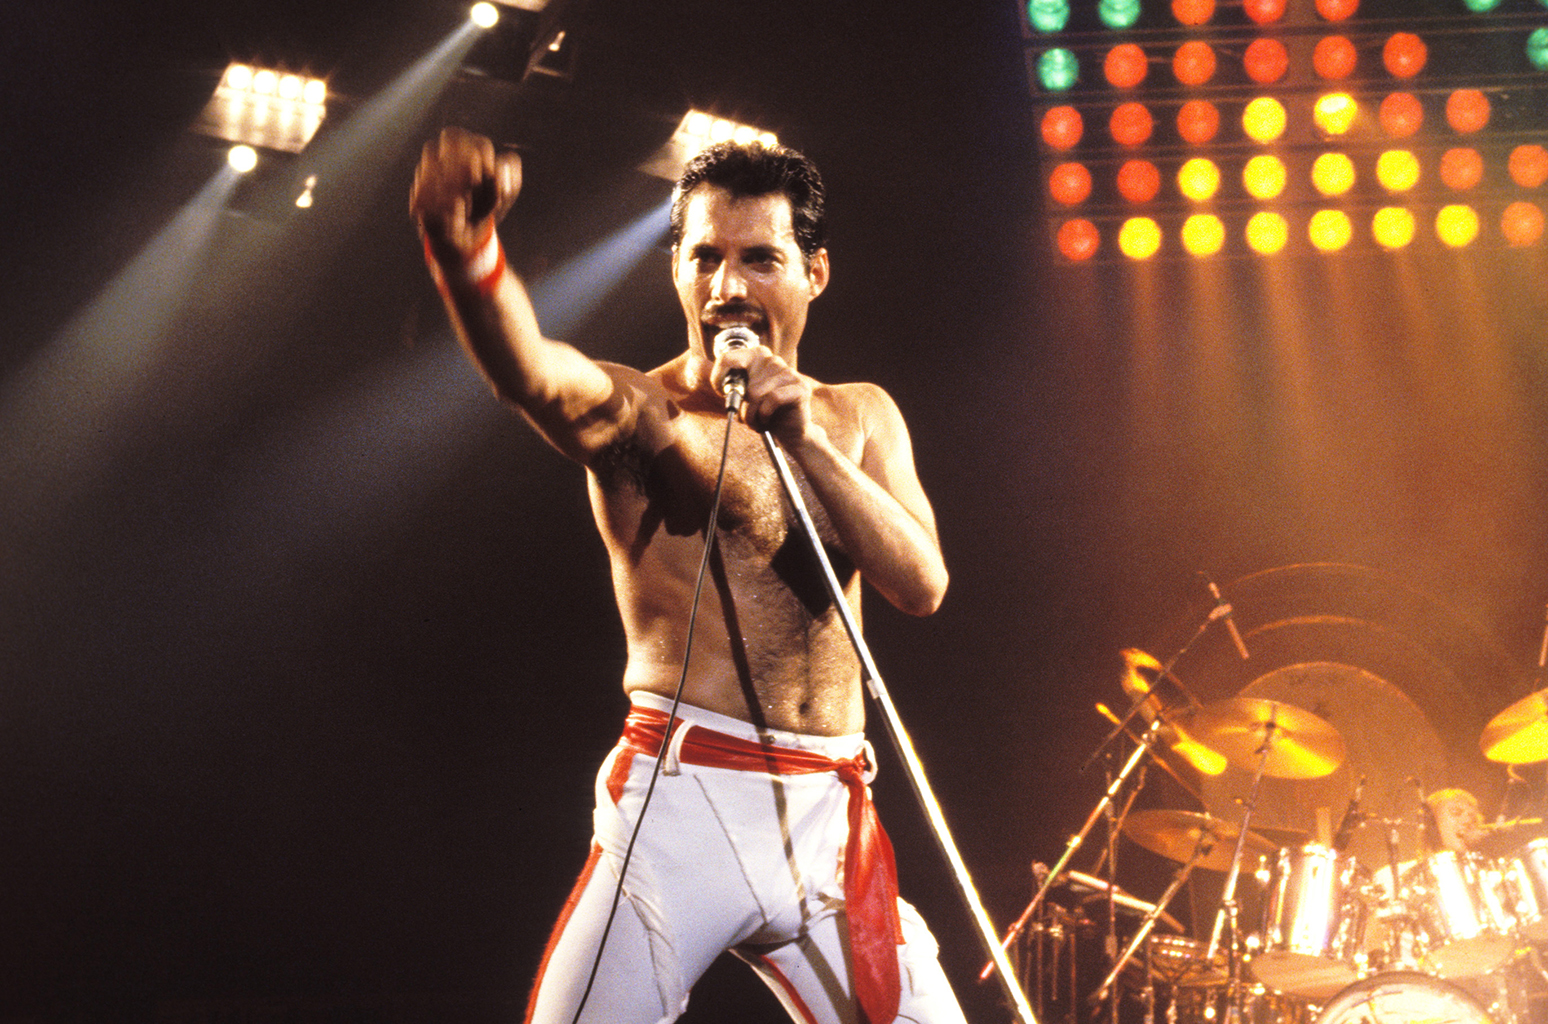 If You Get Less Than 10/15 on This Mandela Effect Quiz, You’re Probably in an Alternate Reality Freddie Mercury of Queen